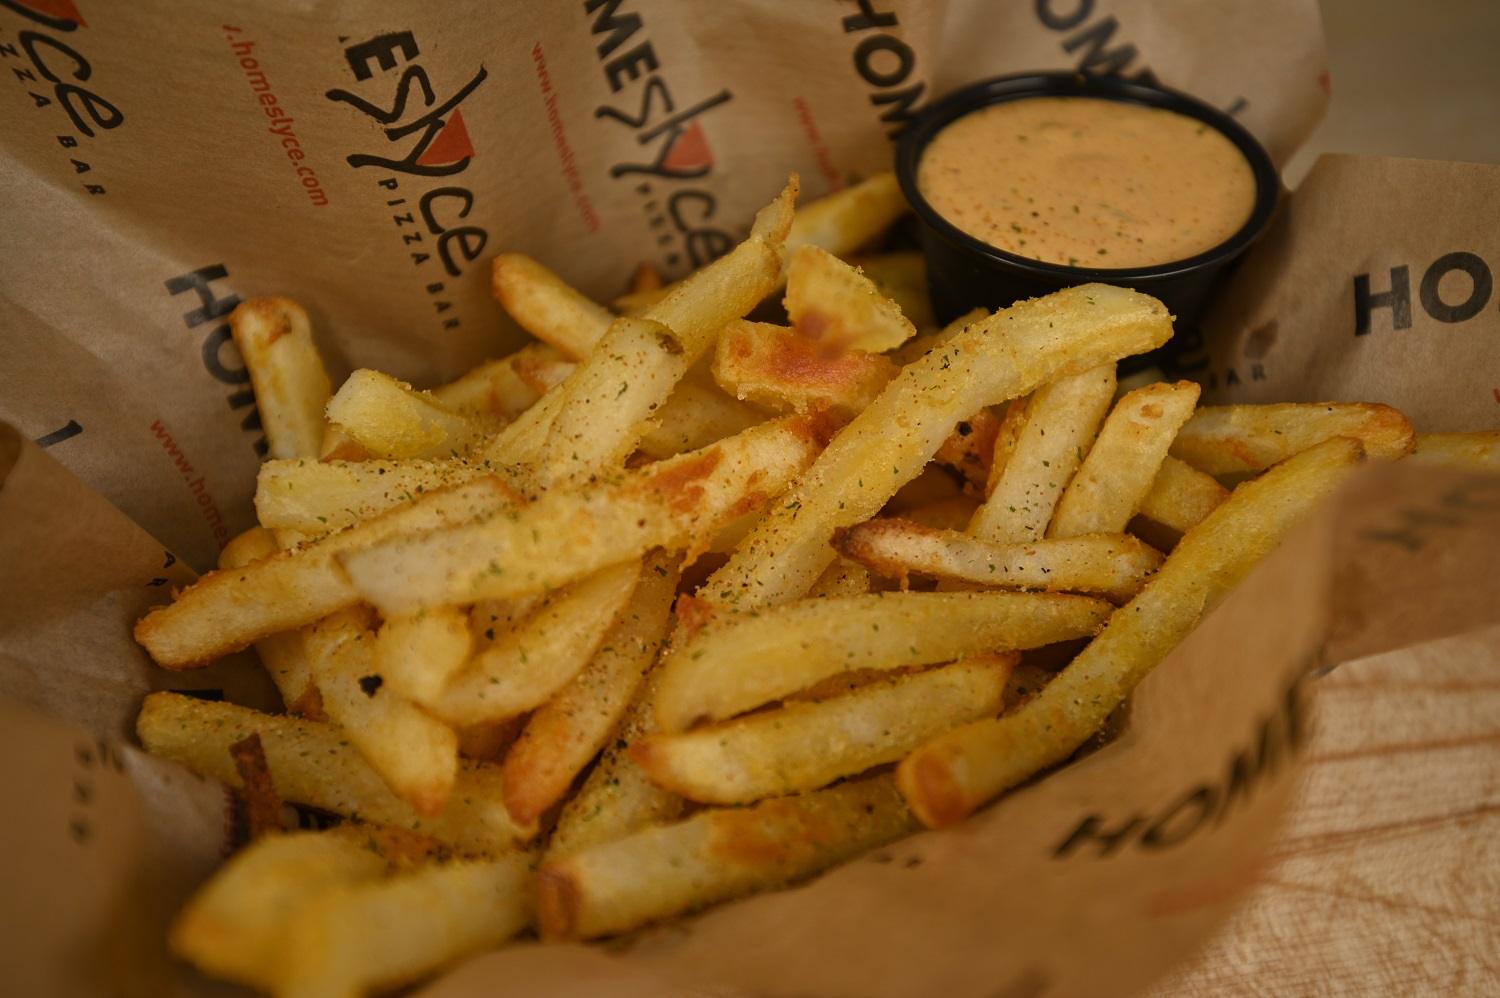 Baked Fries 7.97